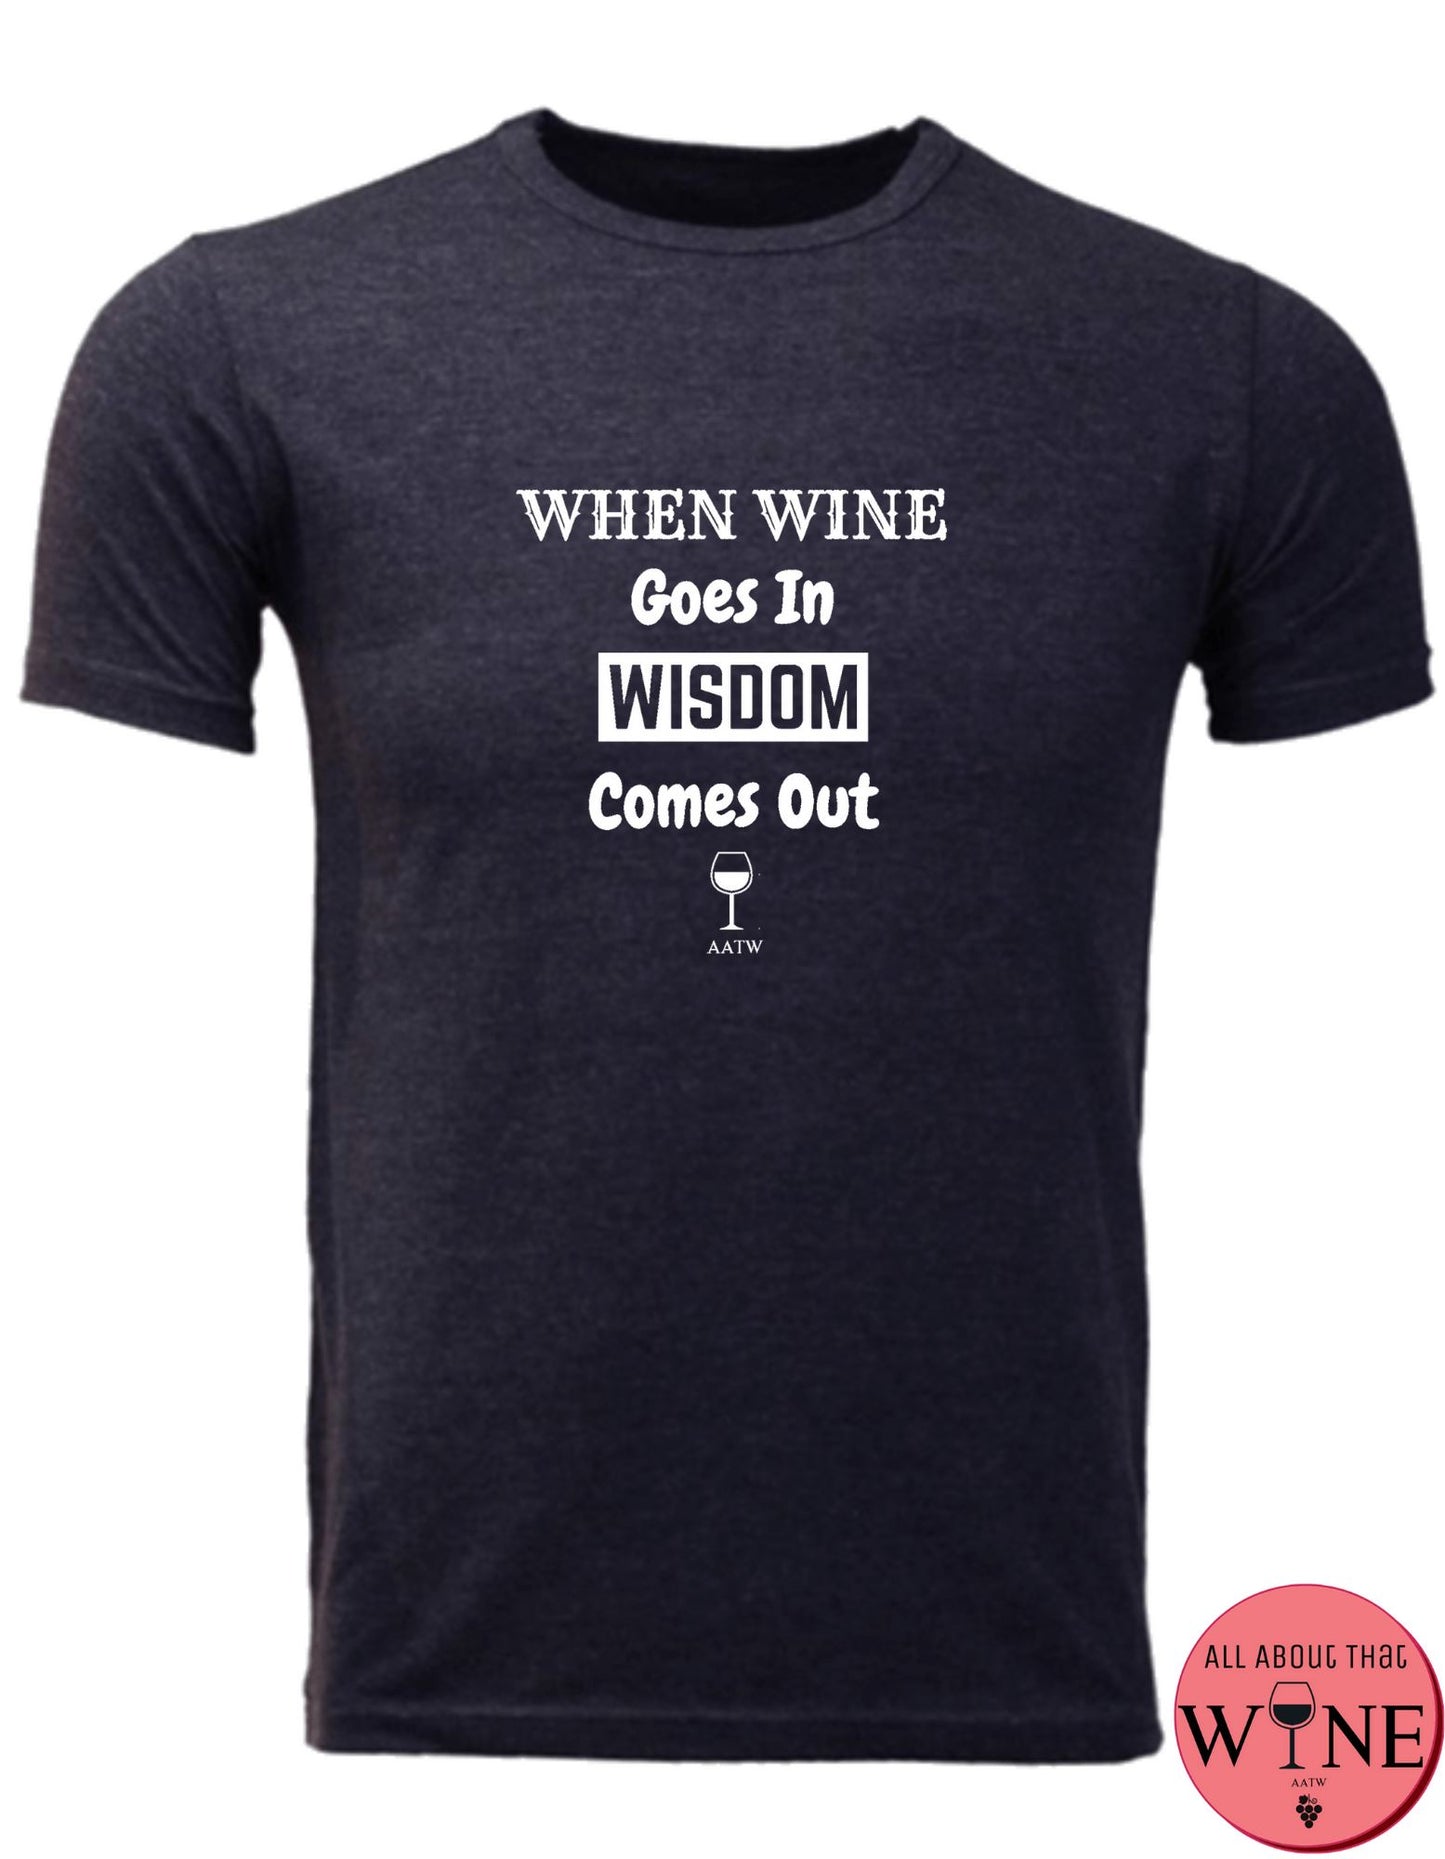 When Wine Goes In - Men's T-shirt S Charcoal melange with white